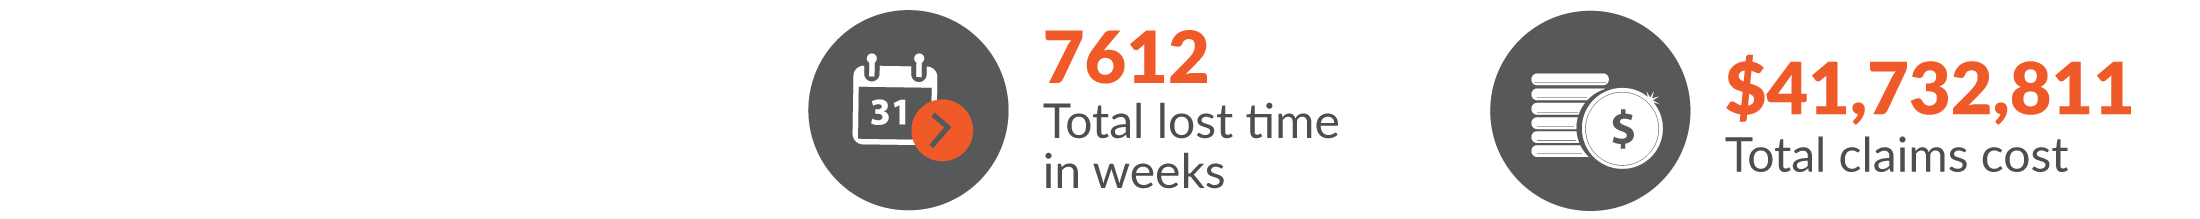 This infographic shows the total workers compensation claims resulted in 7612 total lost time in weeks and $41,732,811 was paid in benefits.